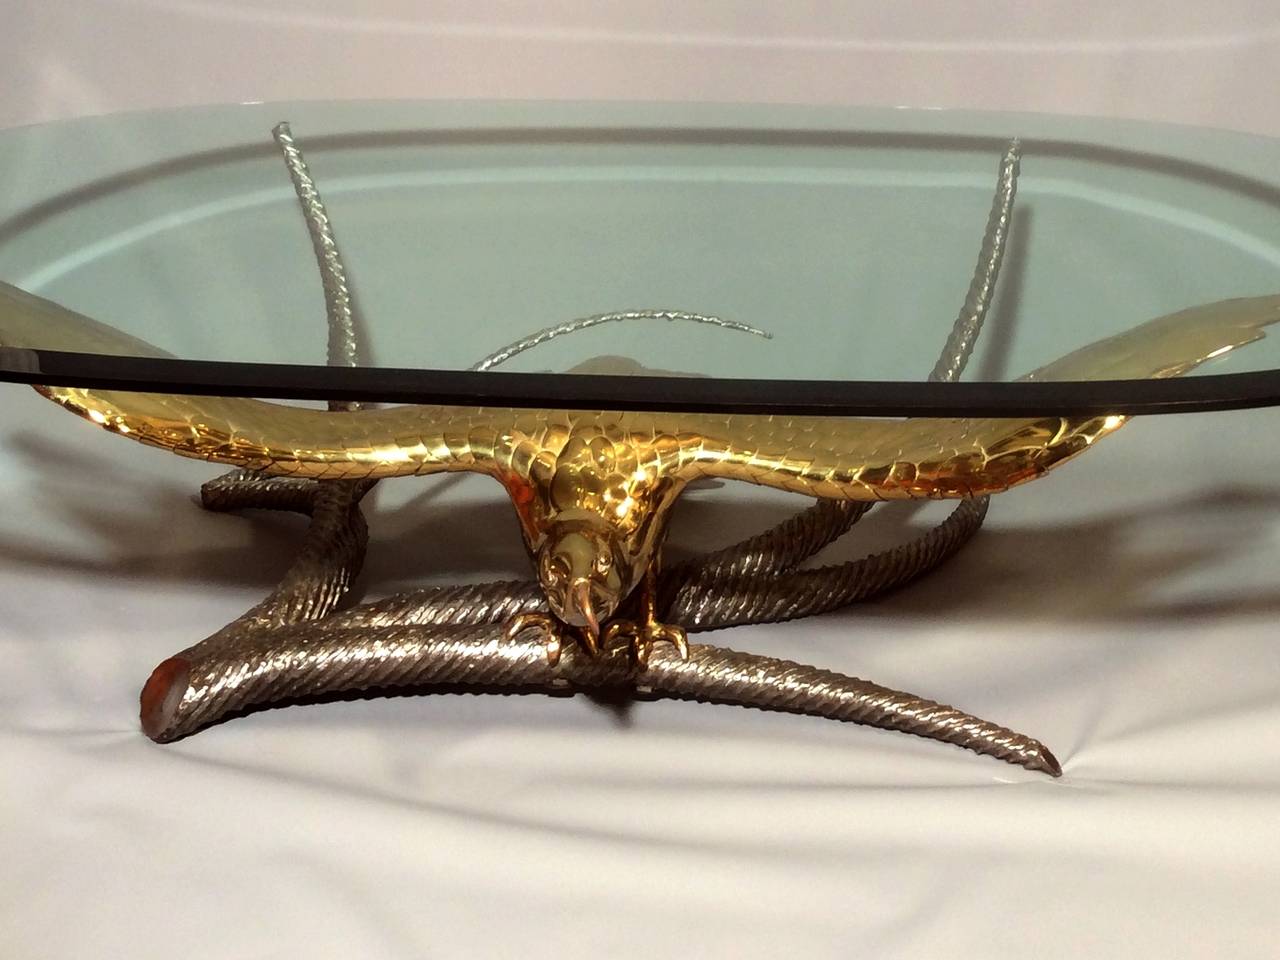 Beautiful sculpture in polished brass and polished steel handmade by Alain Chervet, with  origilal tray in beveled glass. Signed.